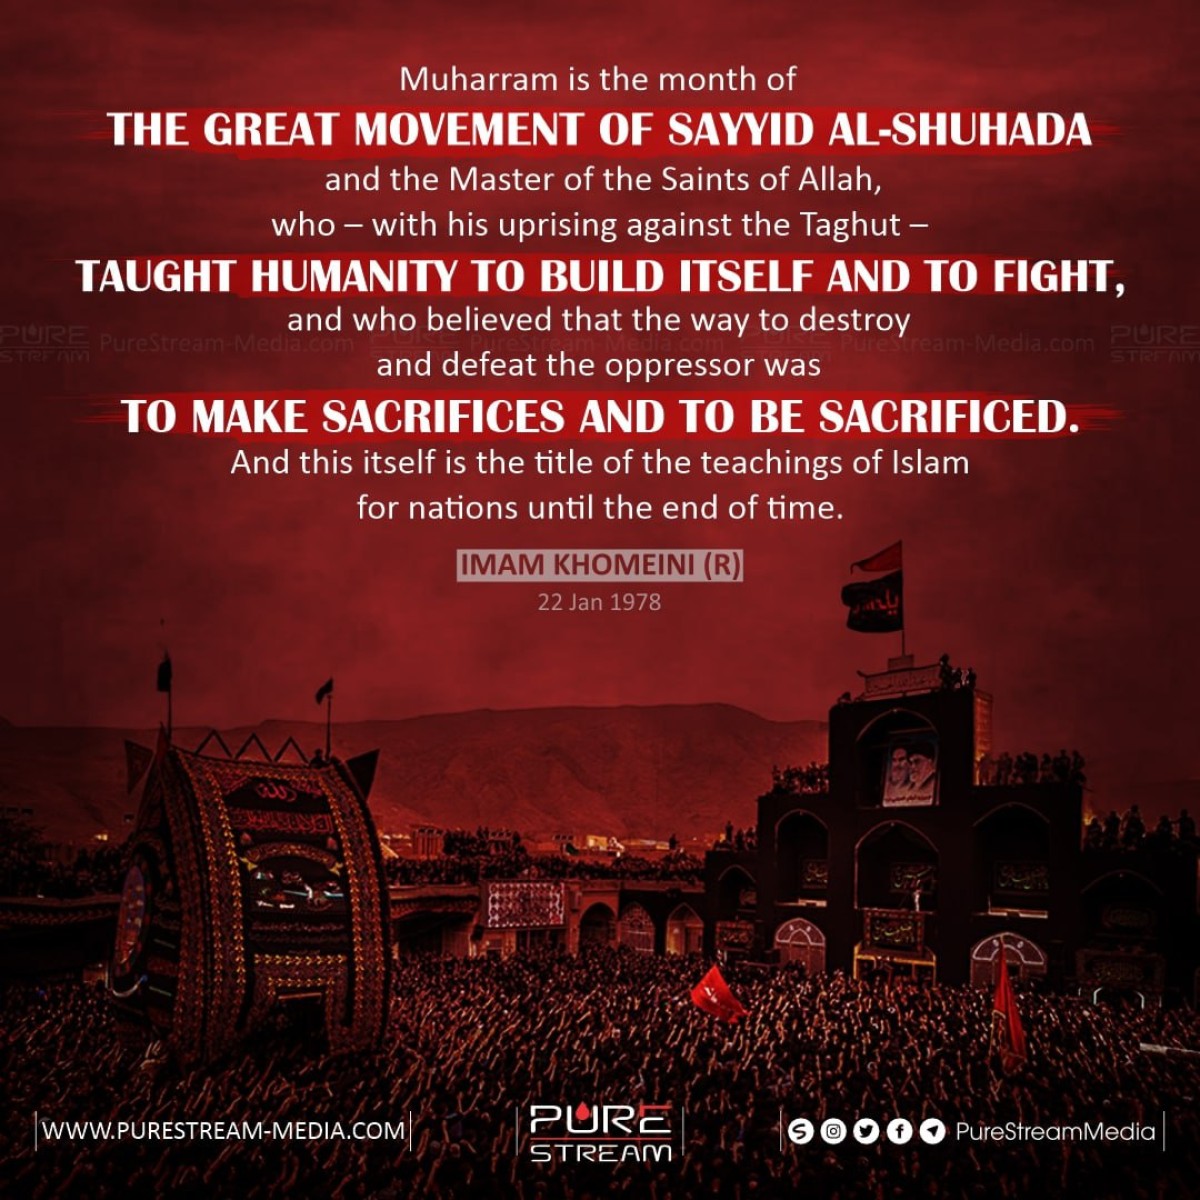 Muharram is the month of the great movement of Sayyid al-Shuhada and the Master of the Saints of Allah